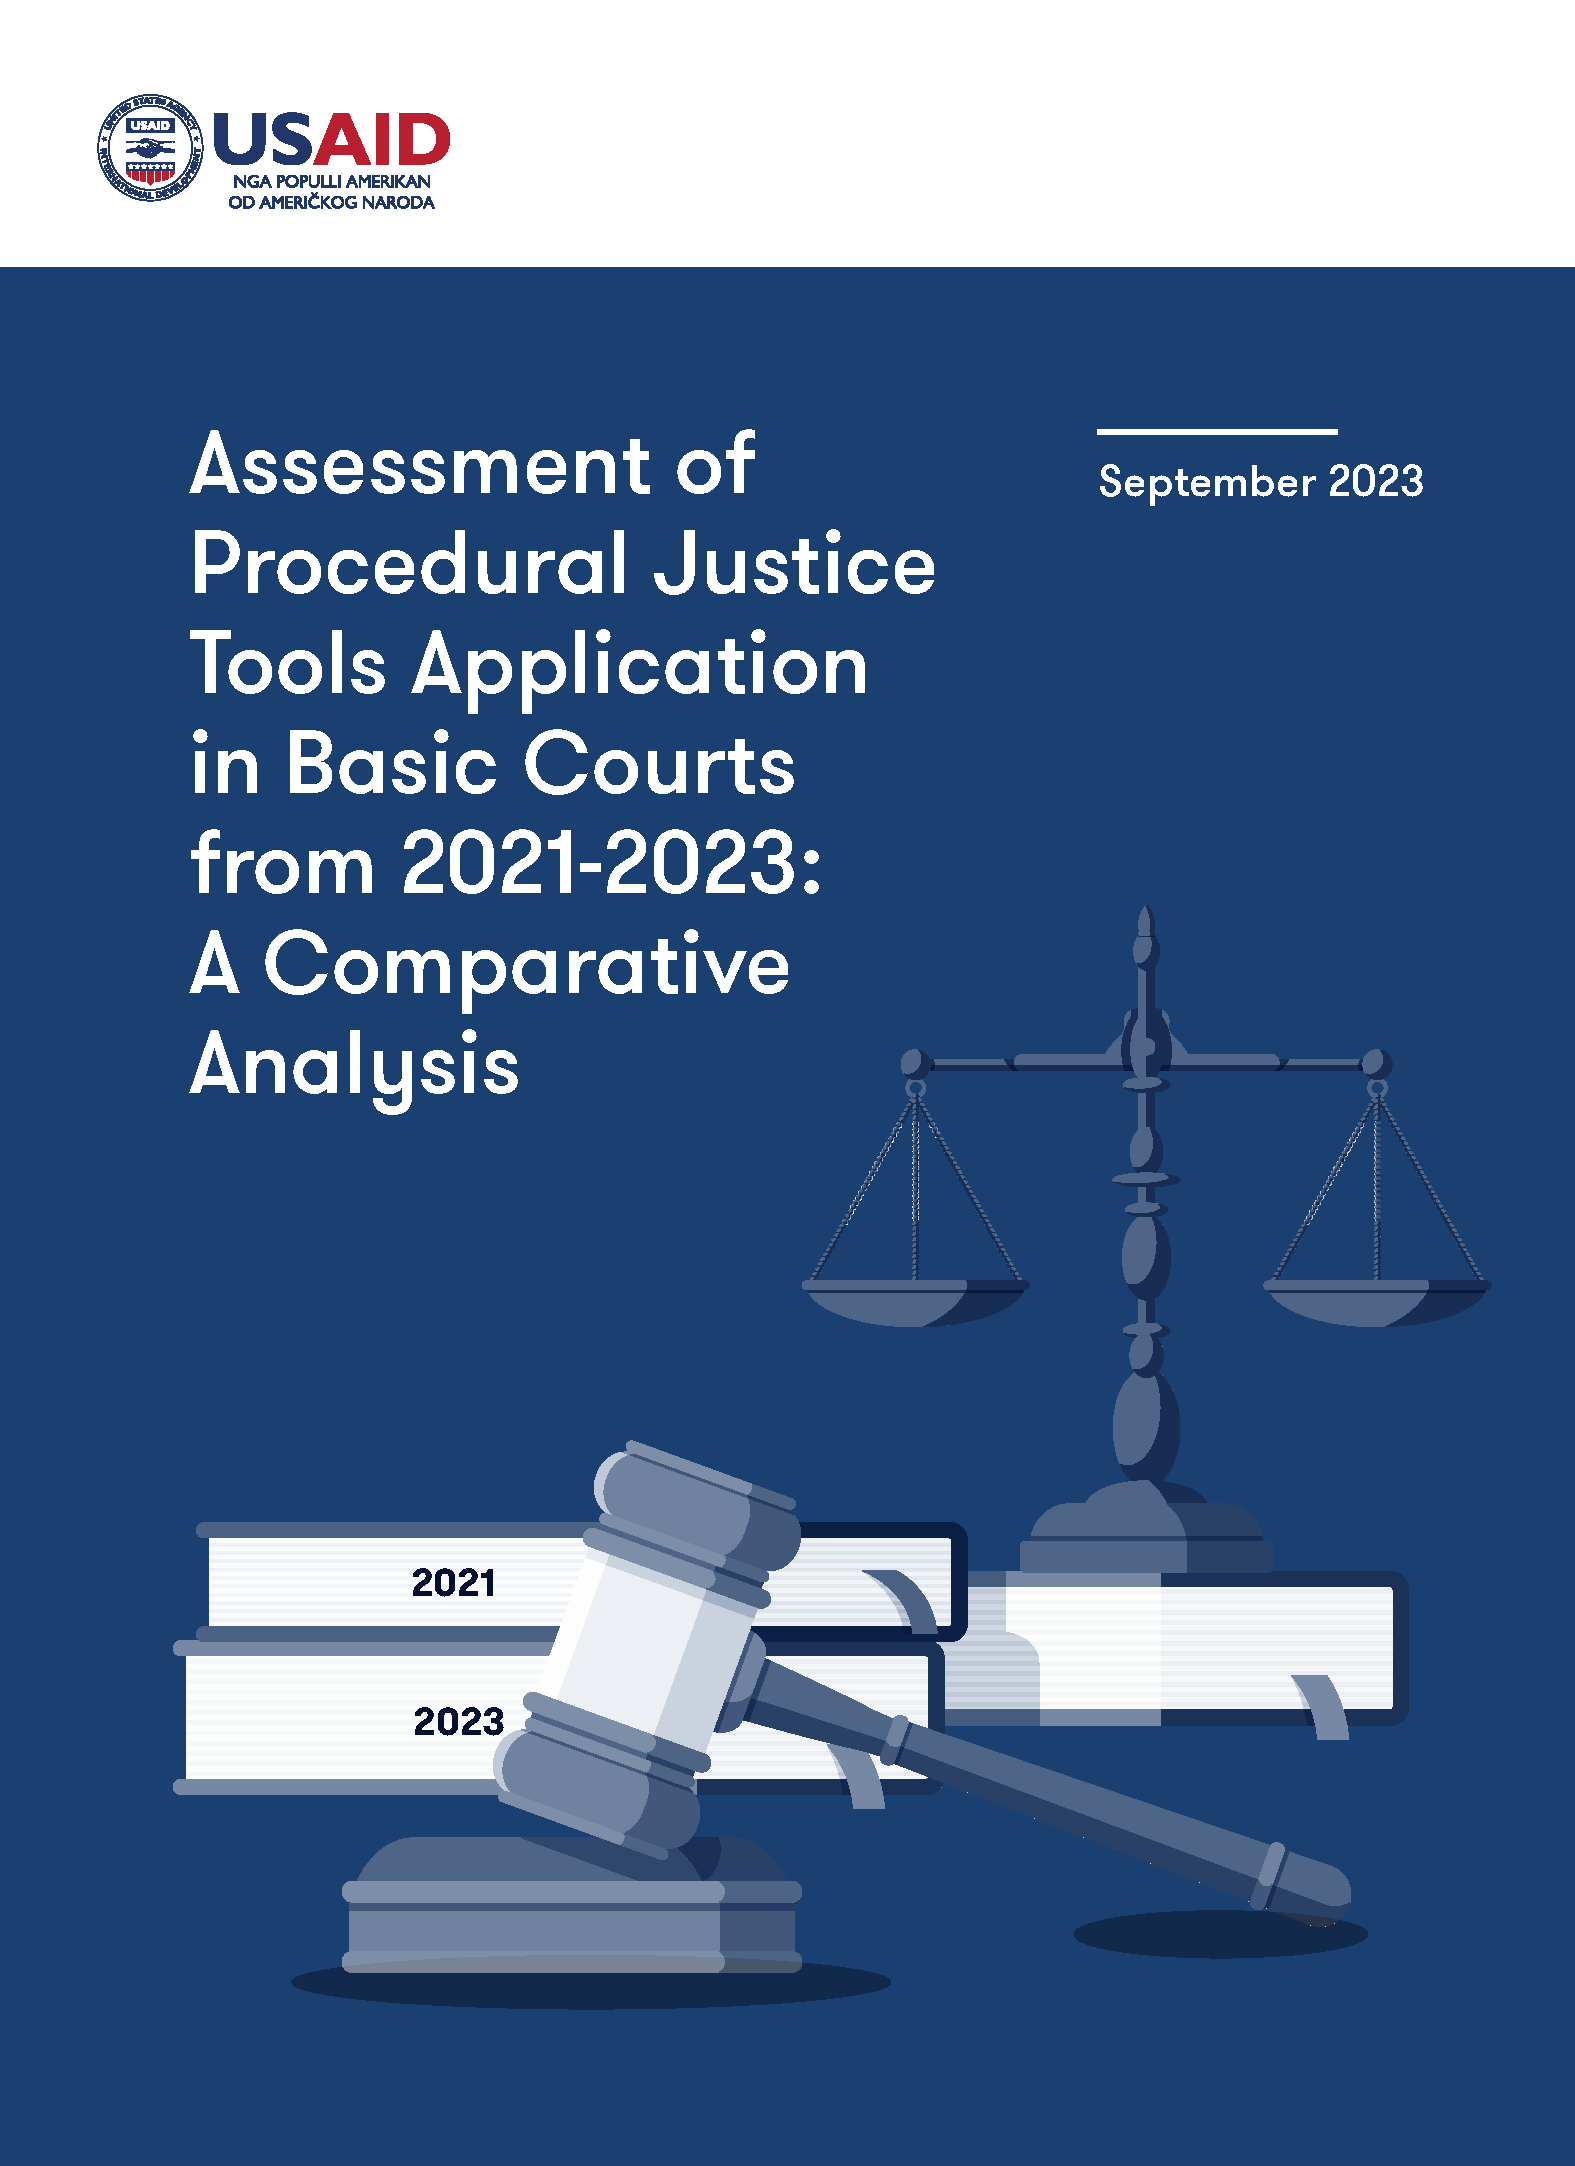 Assessment of Procedural Justice Tools Application in Basic Courts from 2021-2023: A Comparative Analysis